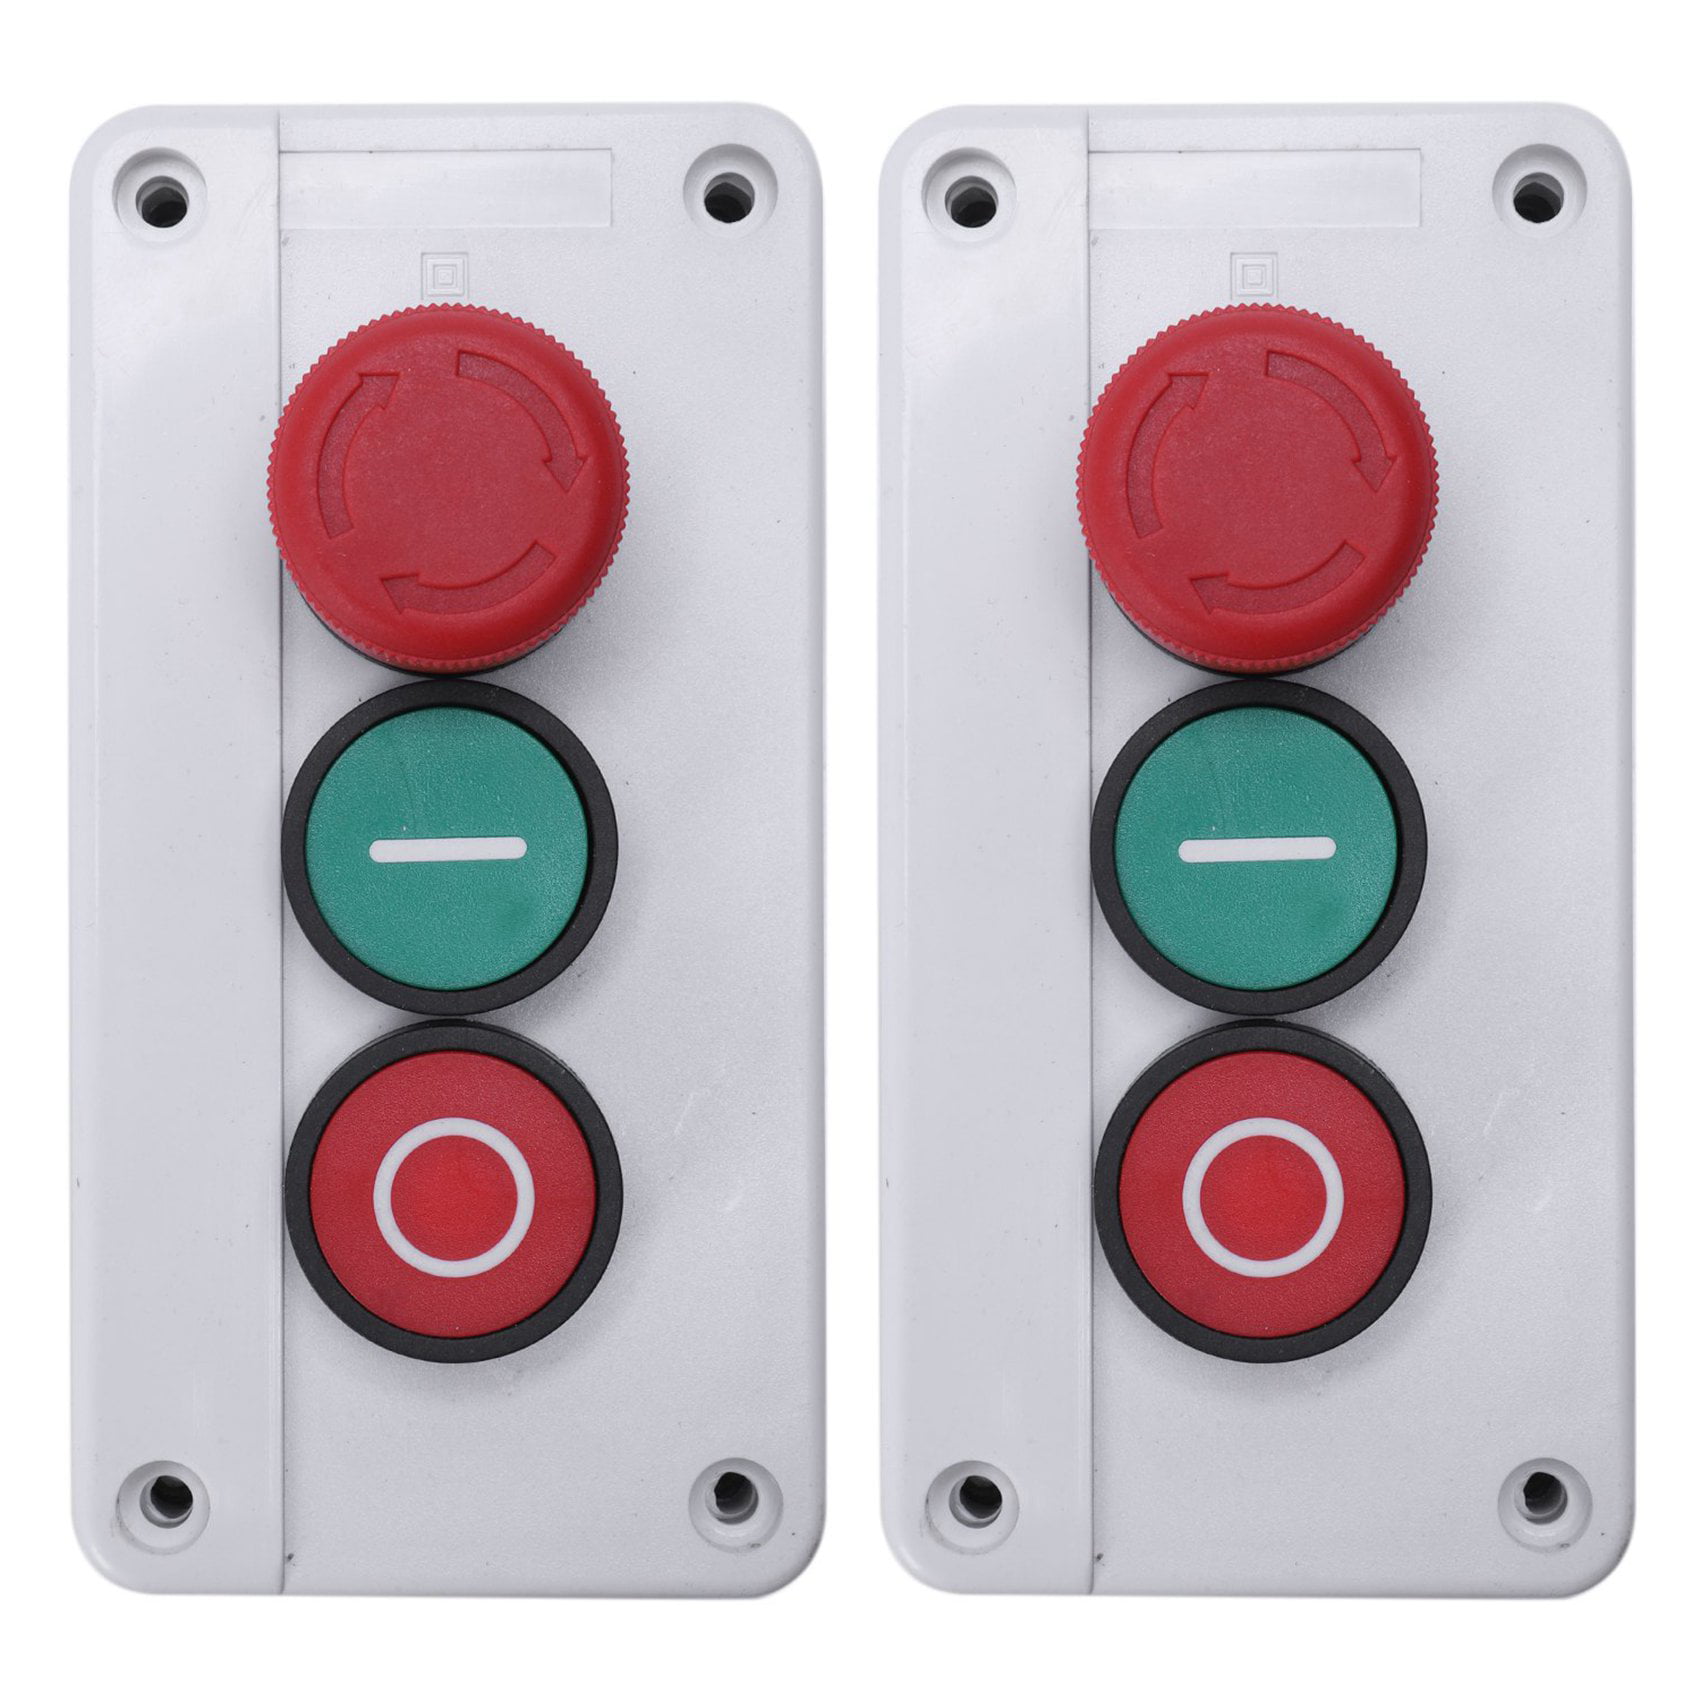 Self-reset Momentary Flat Push Button Switch Heavy Duty Red Green Black White 